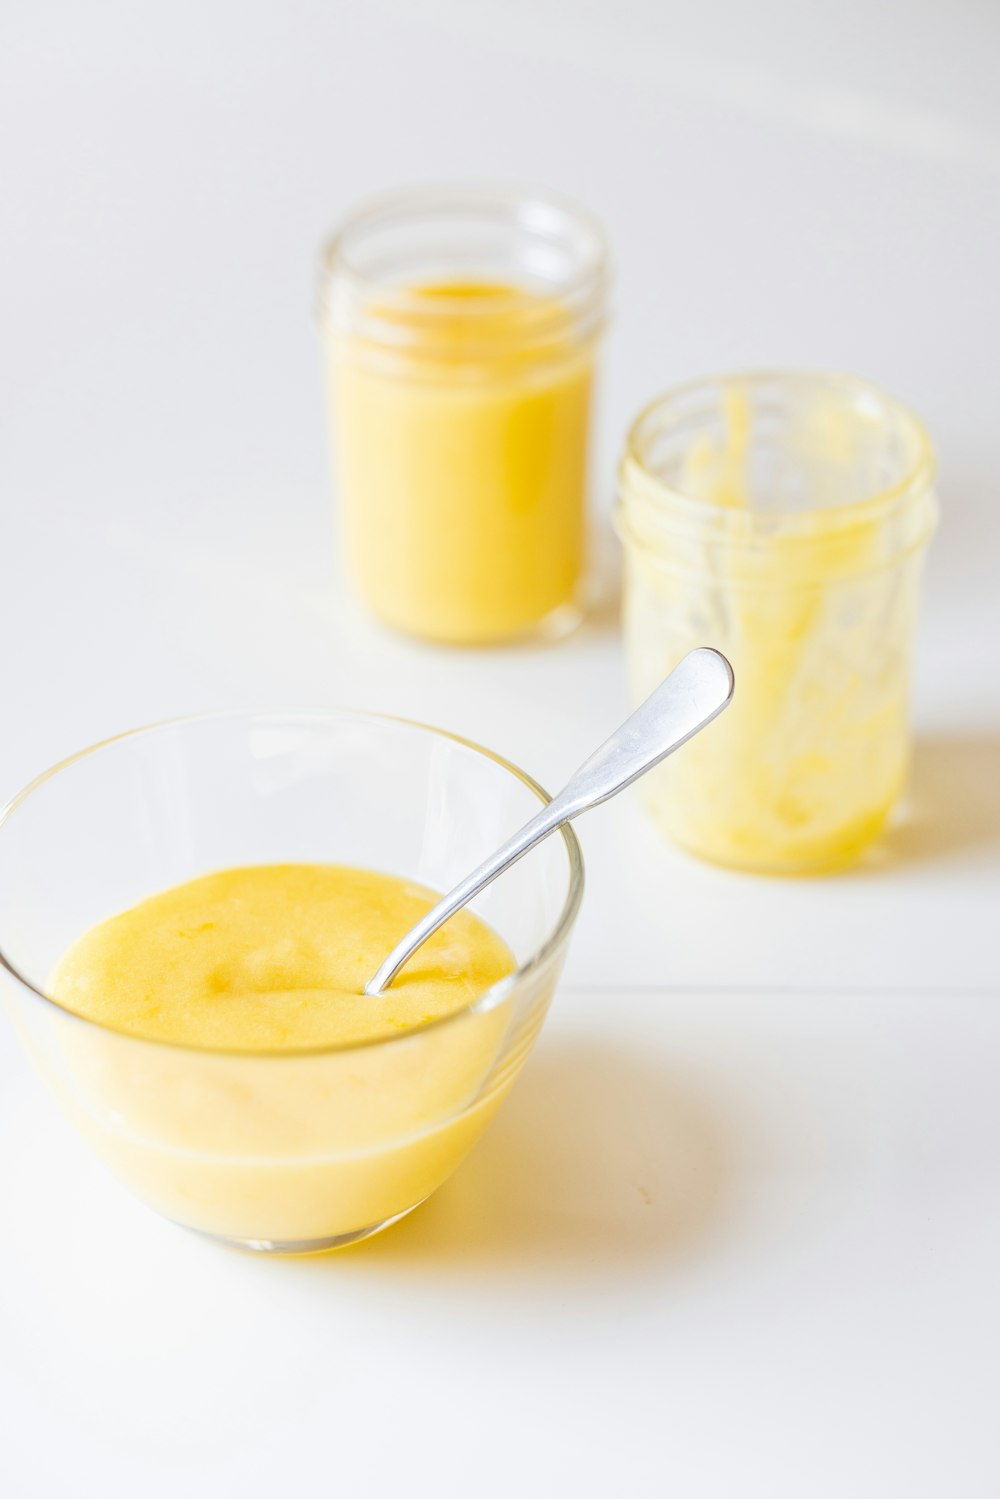 a bowl of yellow liquid with a spoon in it